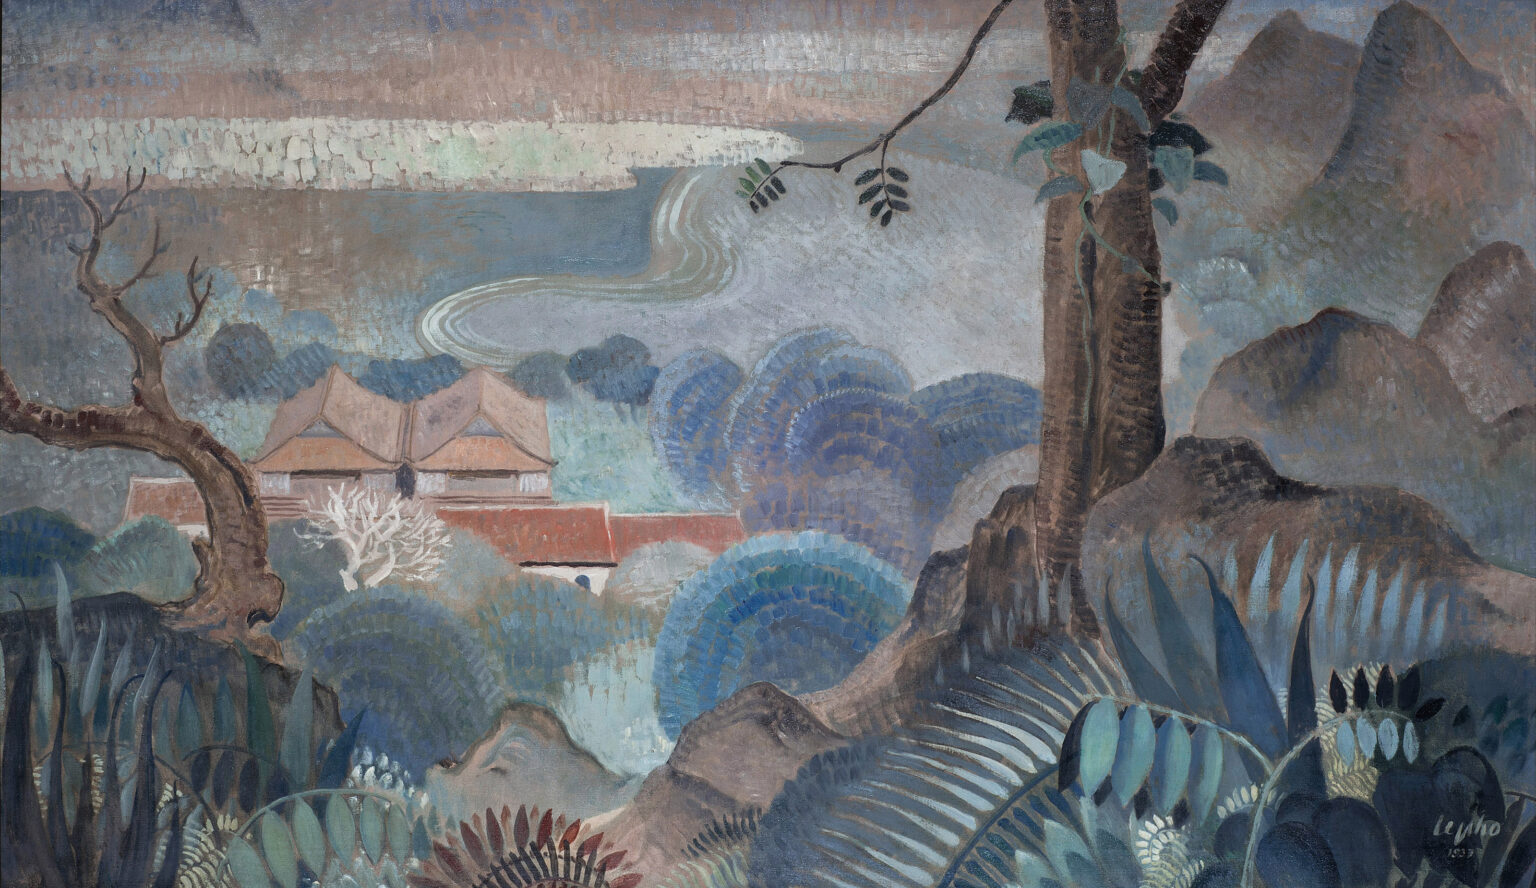 Le Pho (1907-2001) 
VIEW FROM THE HILLTOP 
signed and dated 'Le Pho 1937' (lower right) 
oil on canvas 
113 x 192 cm. (50 x 85 in.) 
Painted in 1937